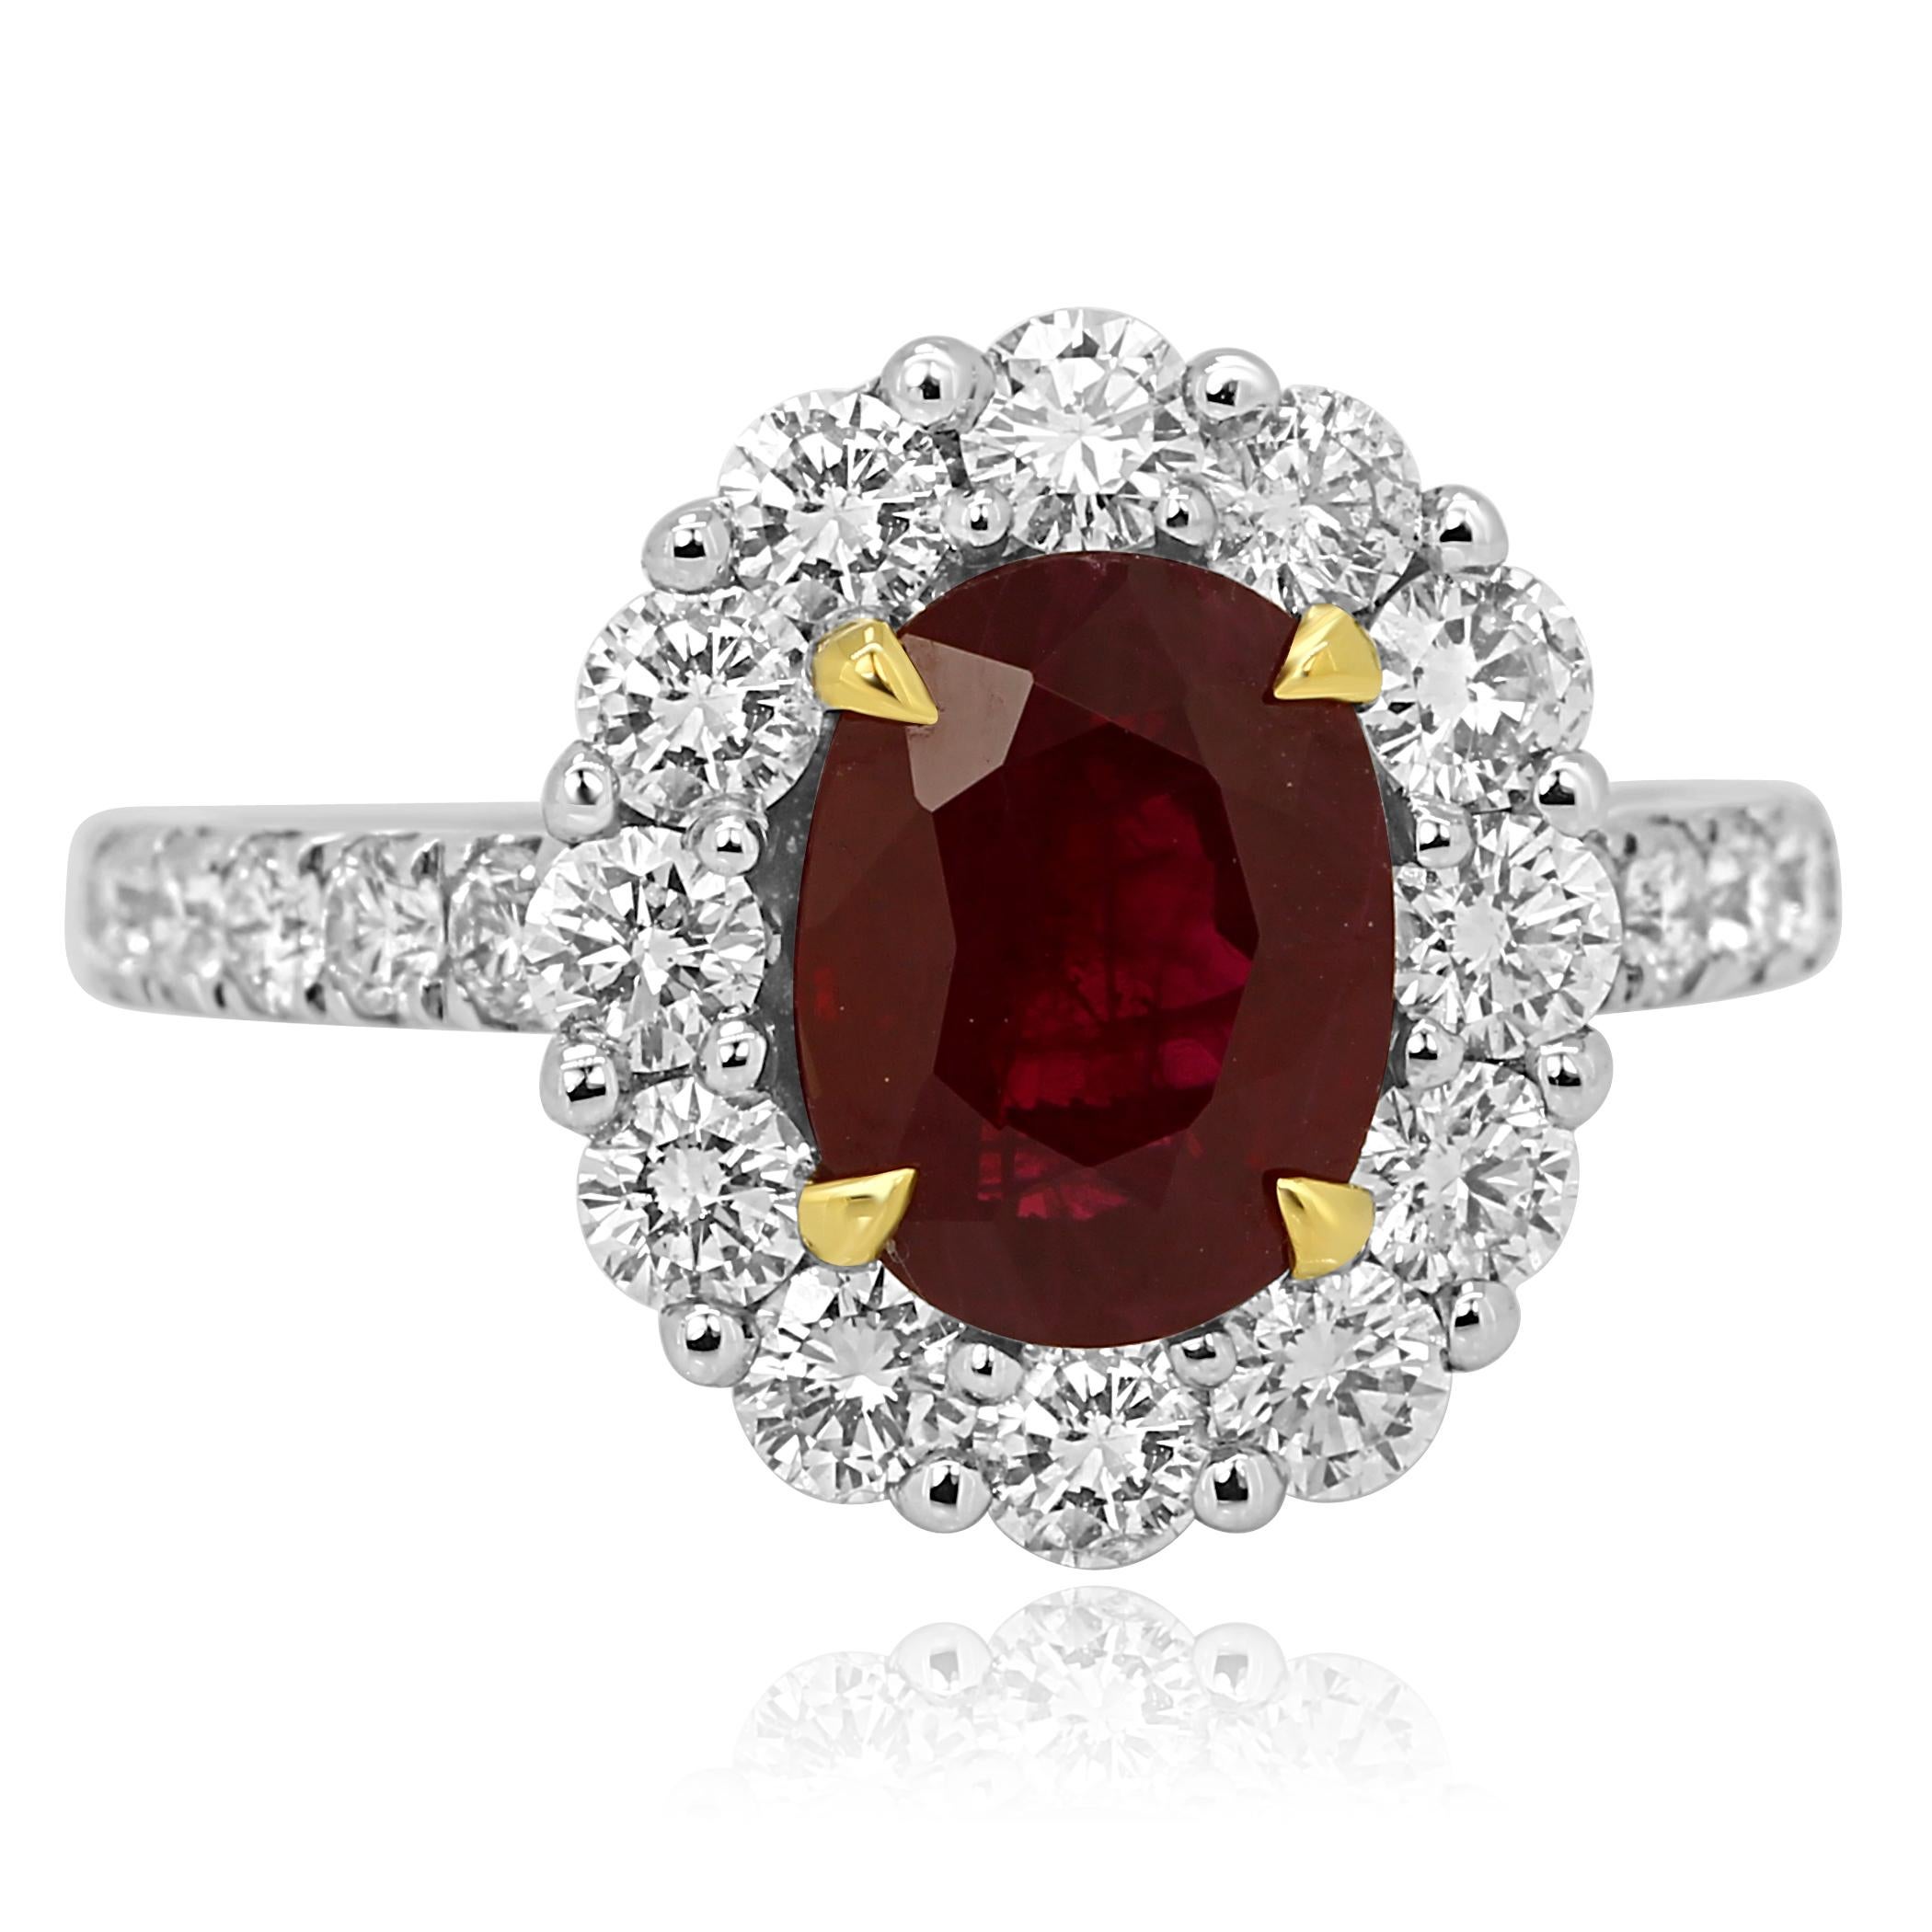 Stunning GIA Certified Burma Ruby Oval 2.48 Carat Encircled in a Single Halo of White Round Diamonds 1.45 Carat set in Gorgeous Hand Made 18K white and Yellow Gold Bridal Fashion Ring.

MADE IN USA 
Center Ruby Oval Weight 2.48 Carat
Total Weight